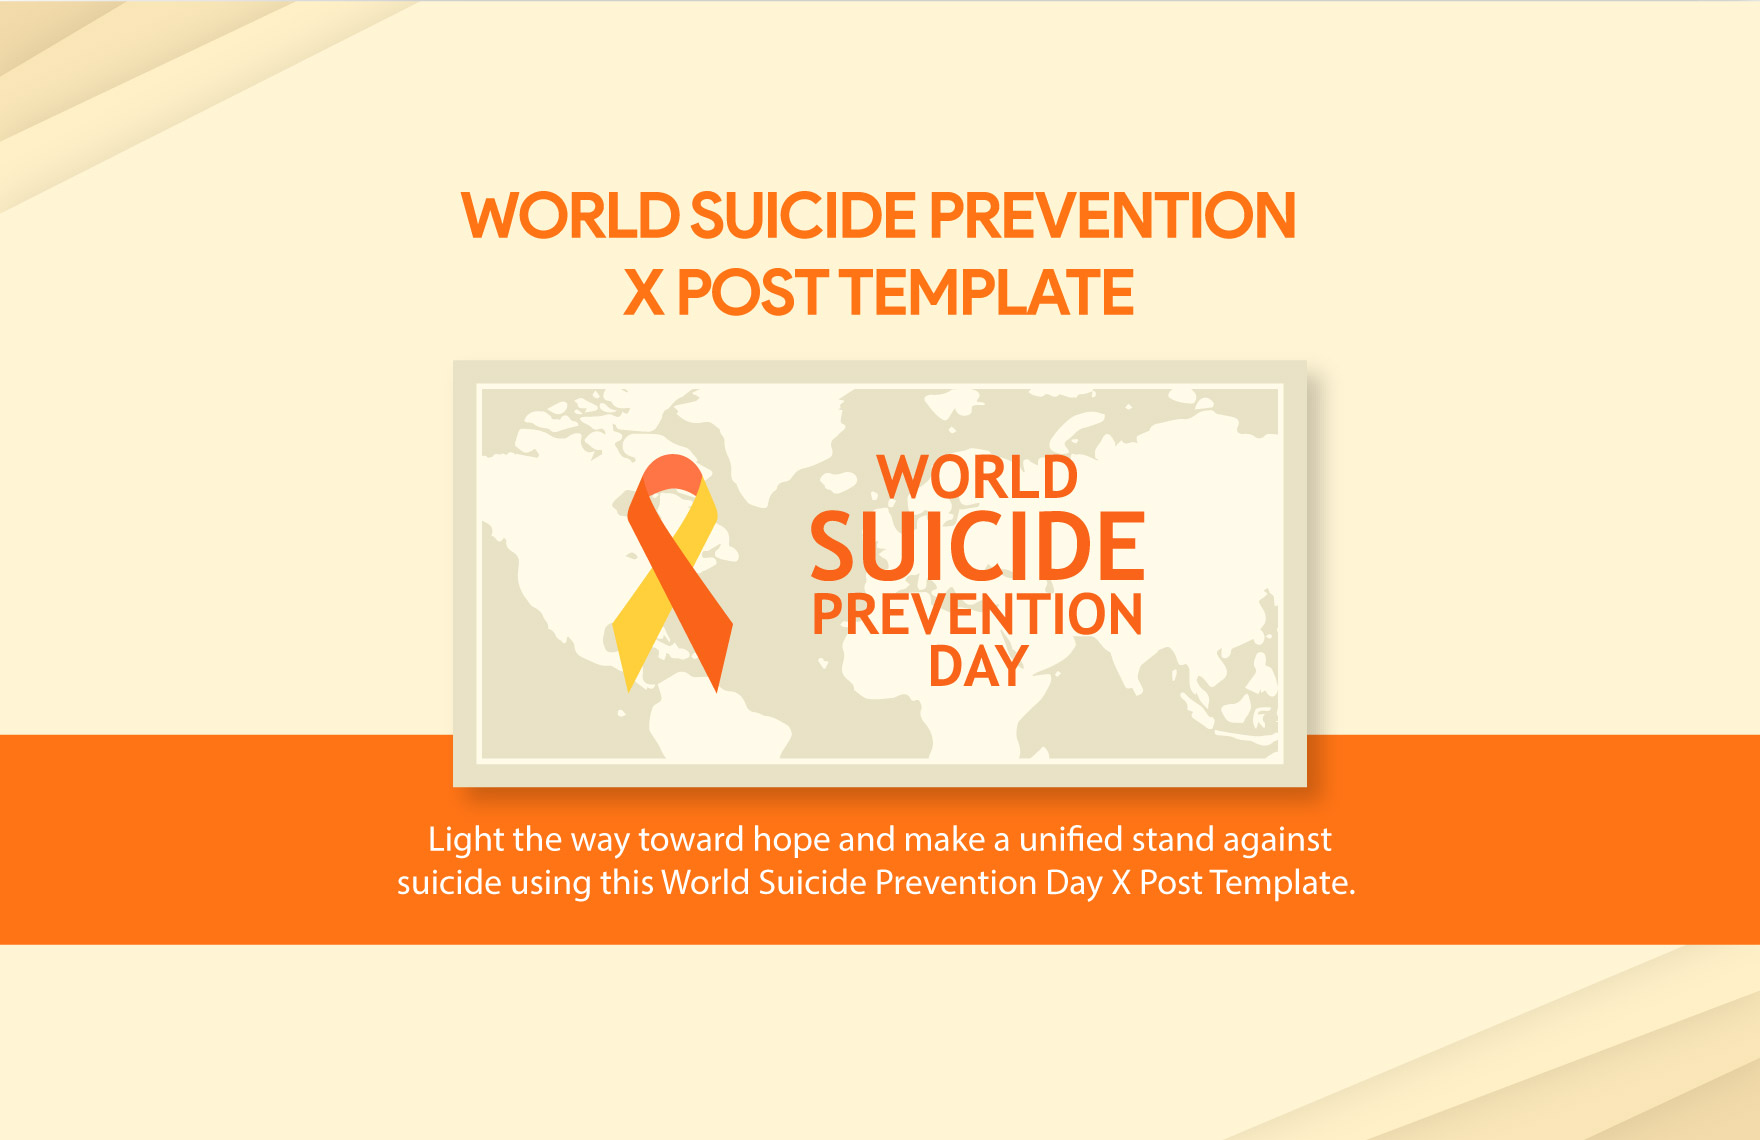 Free World Suicide Prevention Day X Post Template in Illustrator, PSD, PNG